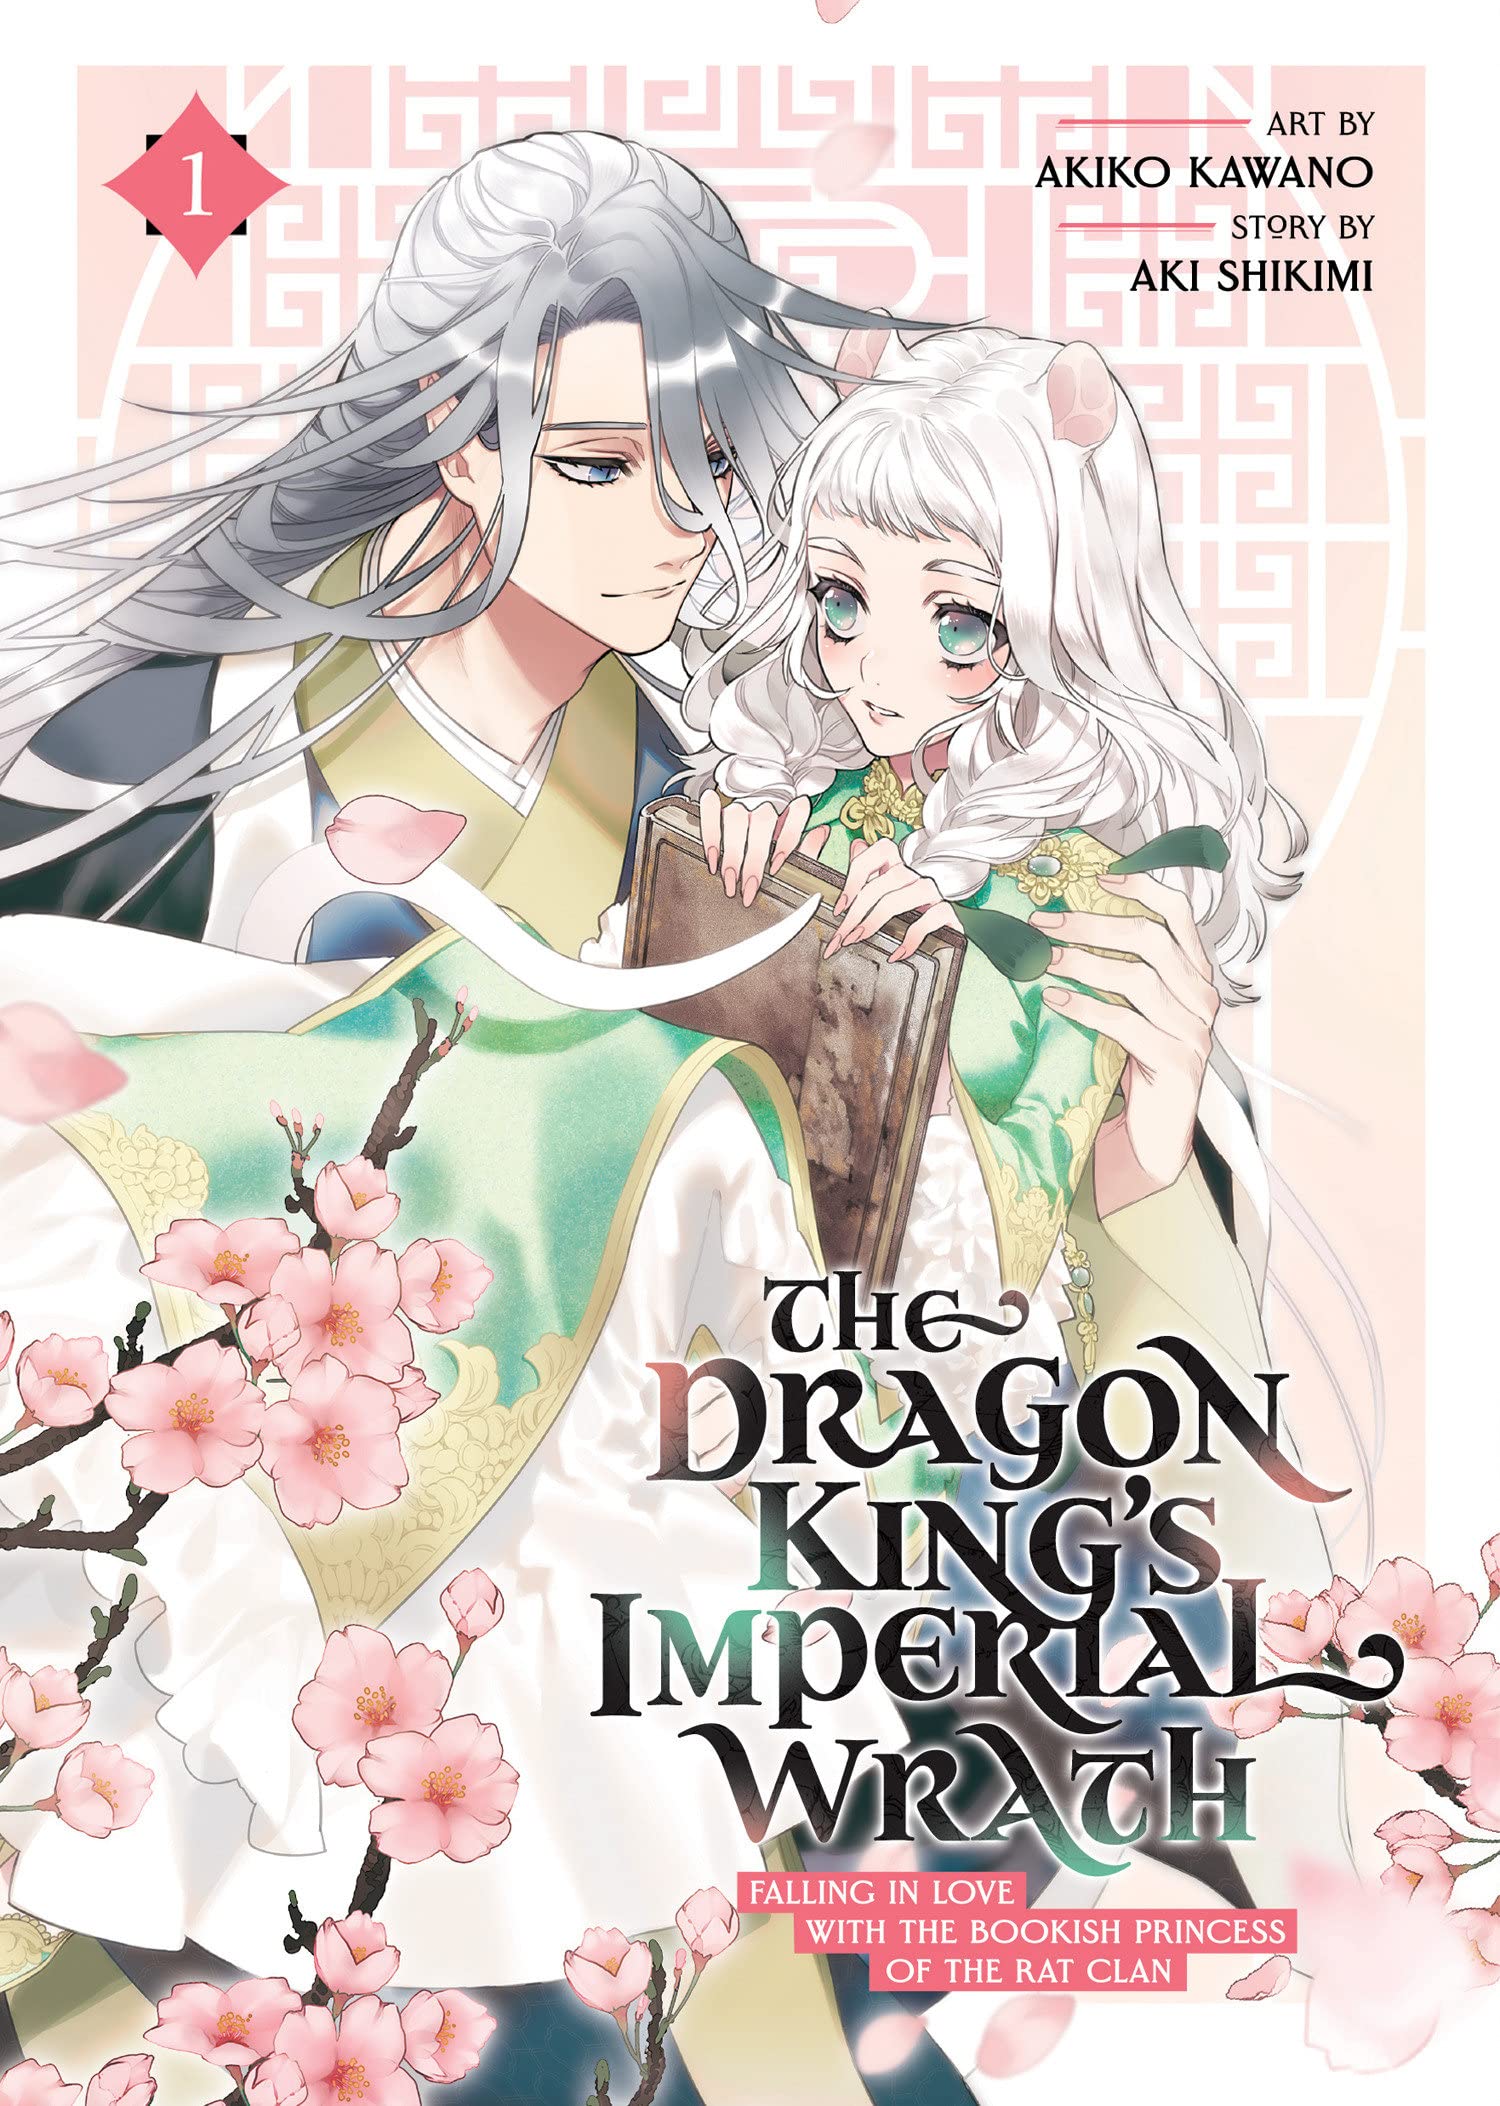 The Dragon King's Imperial Wrath: Falling in Love with the Bookish Princess of the Rat Clan Vol. 01